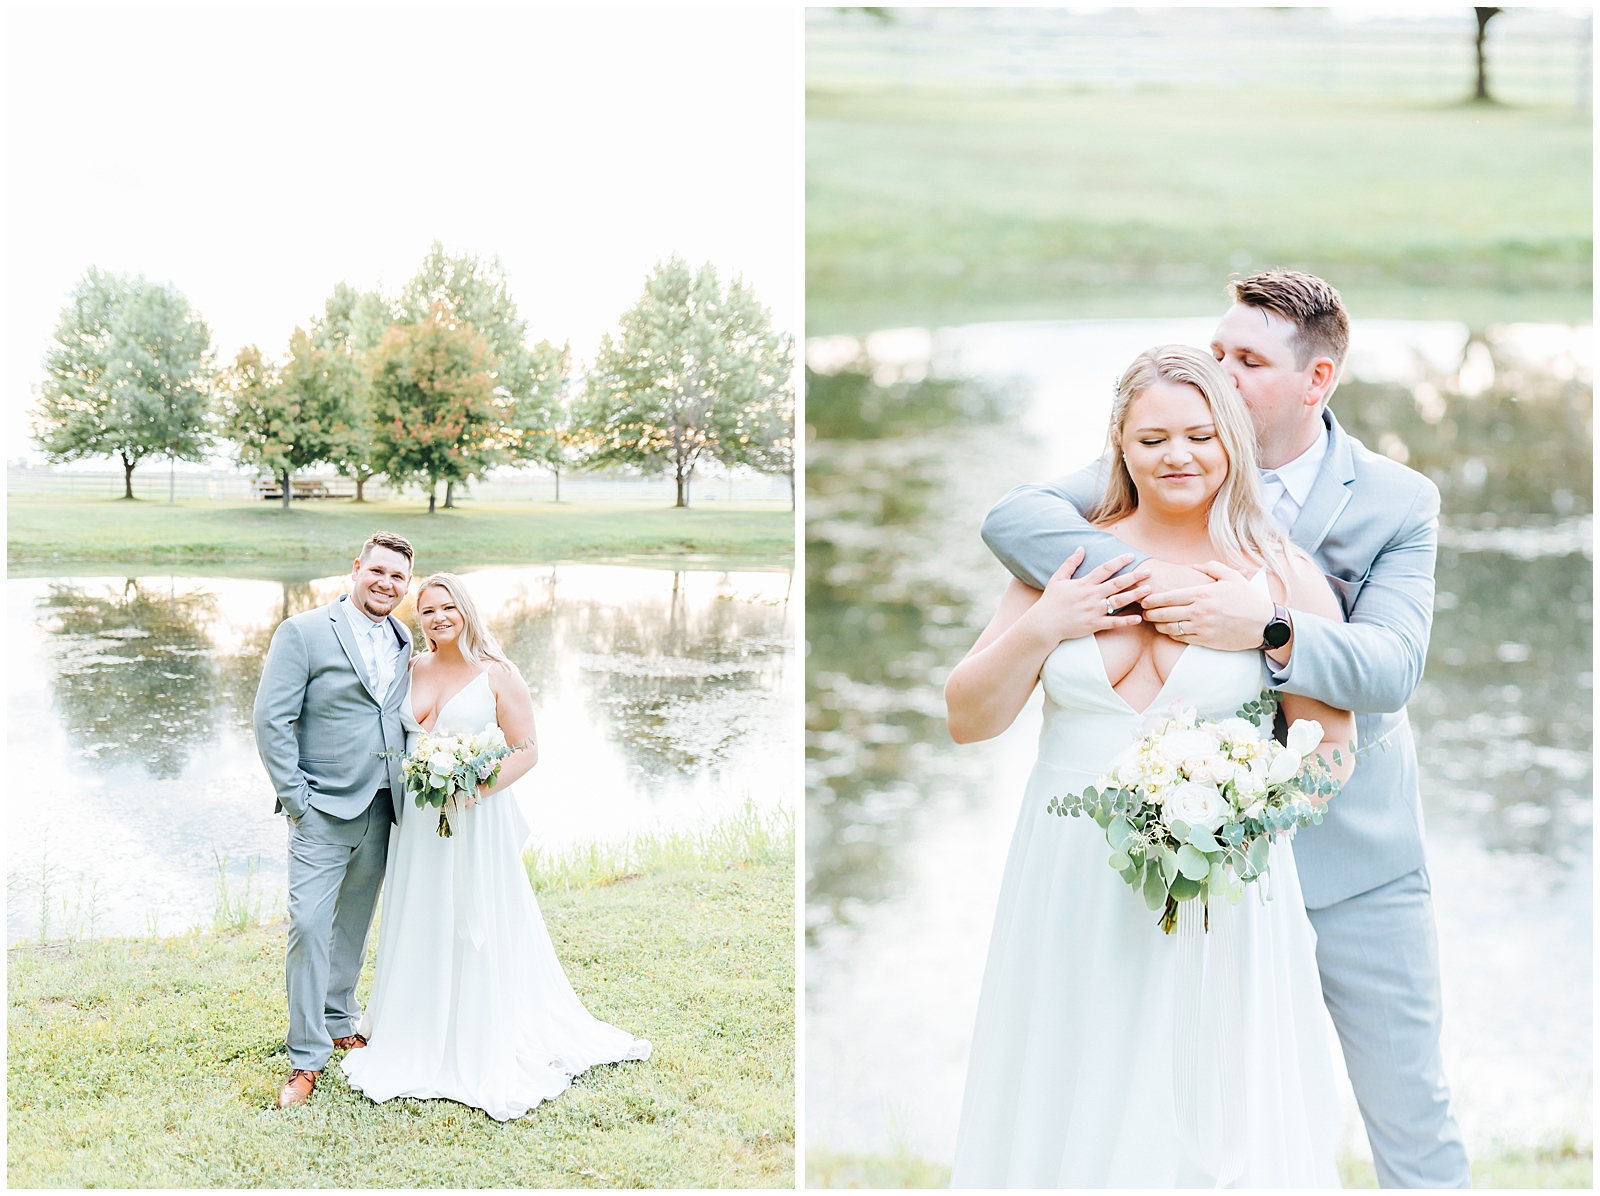 Sunset Husband and Wife Portraits at White Willow Estate Wedding